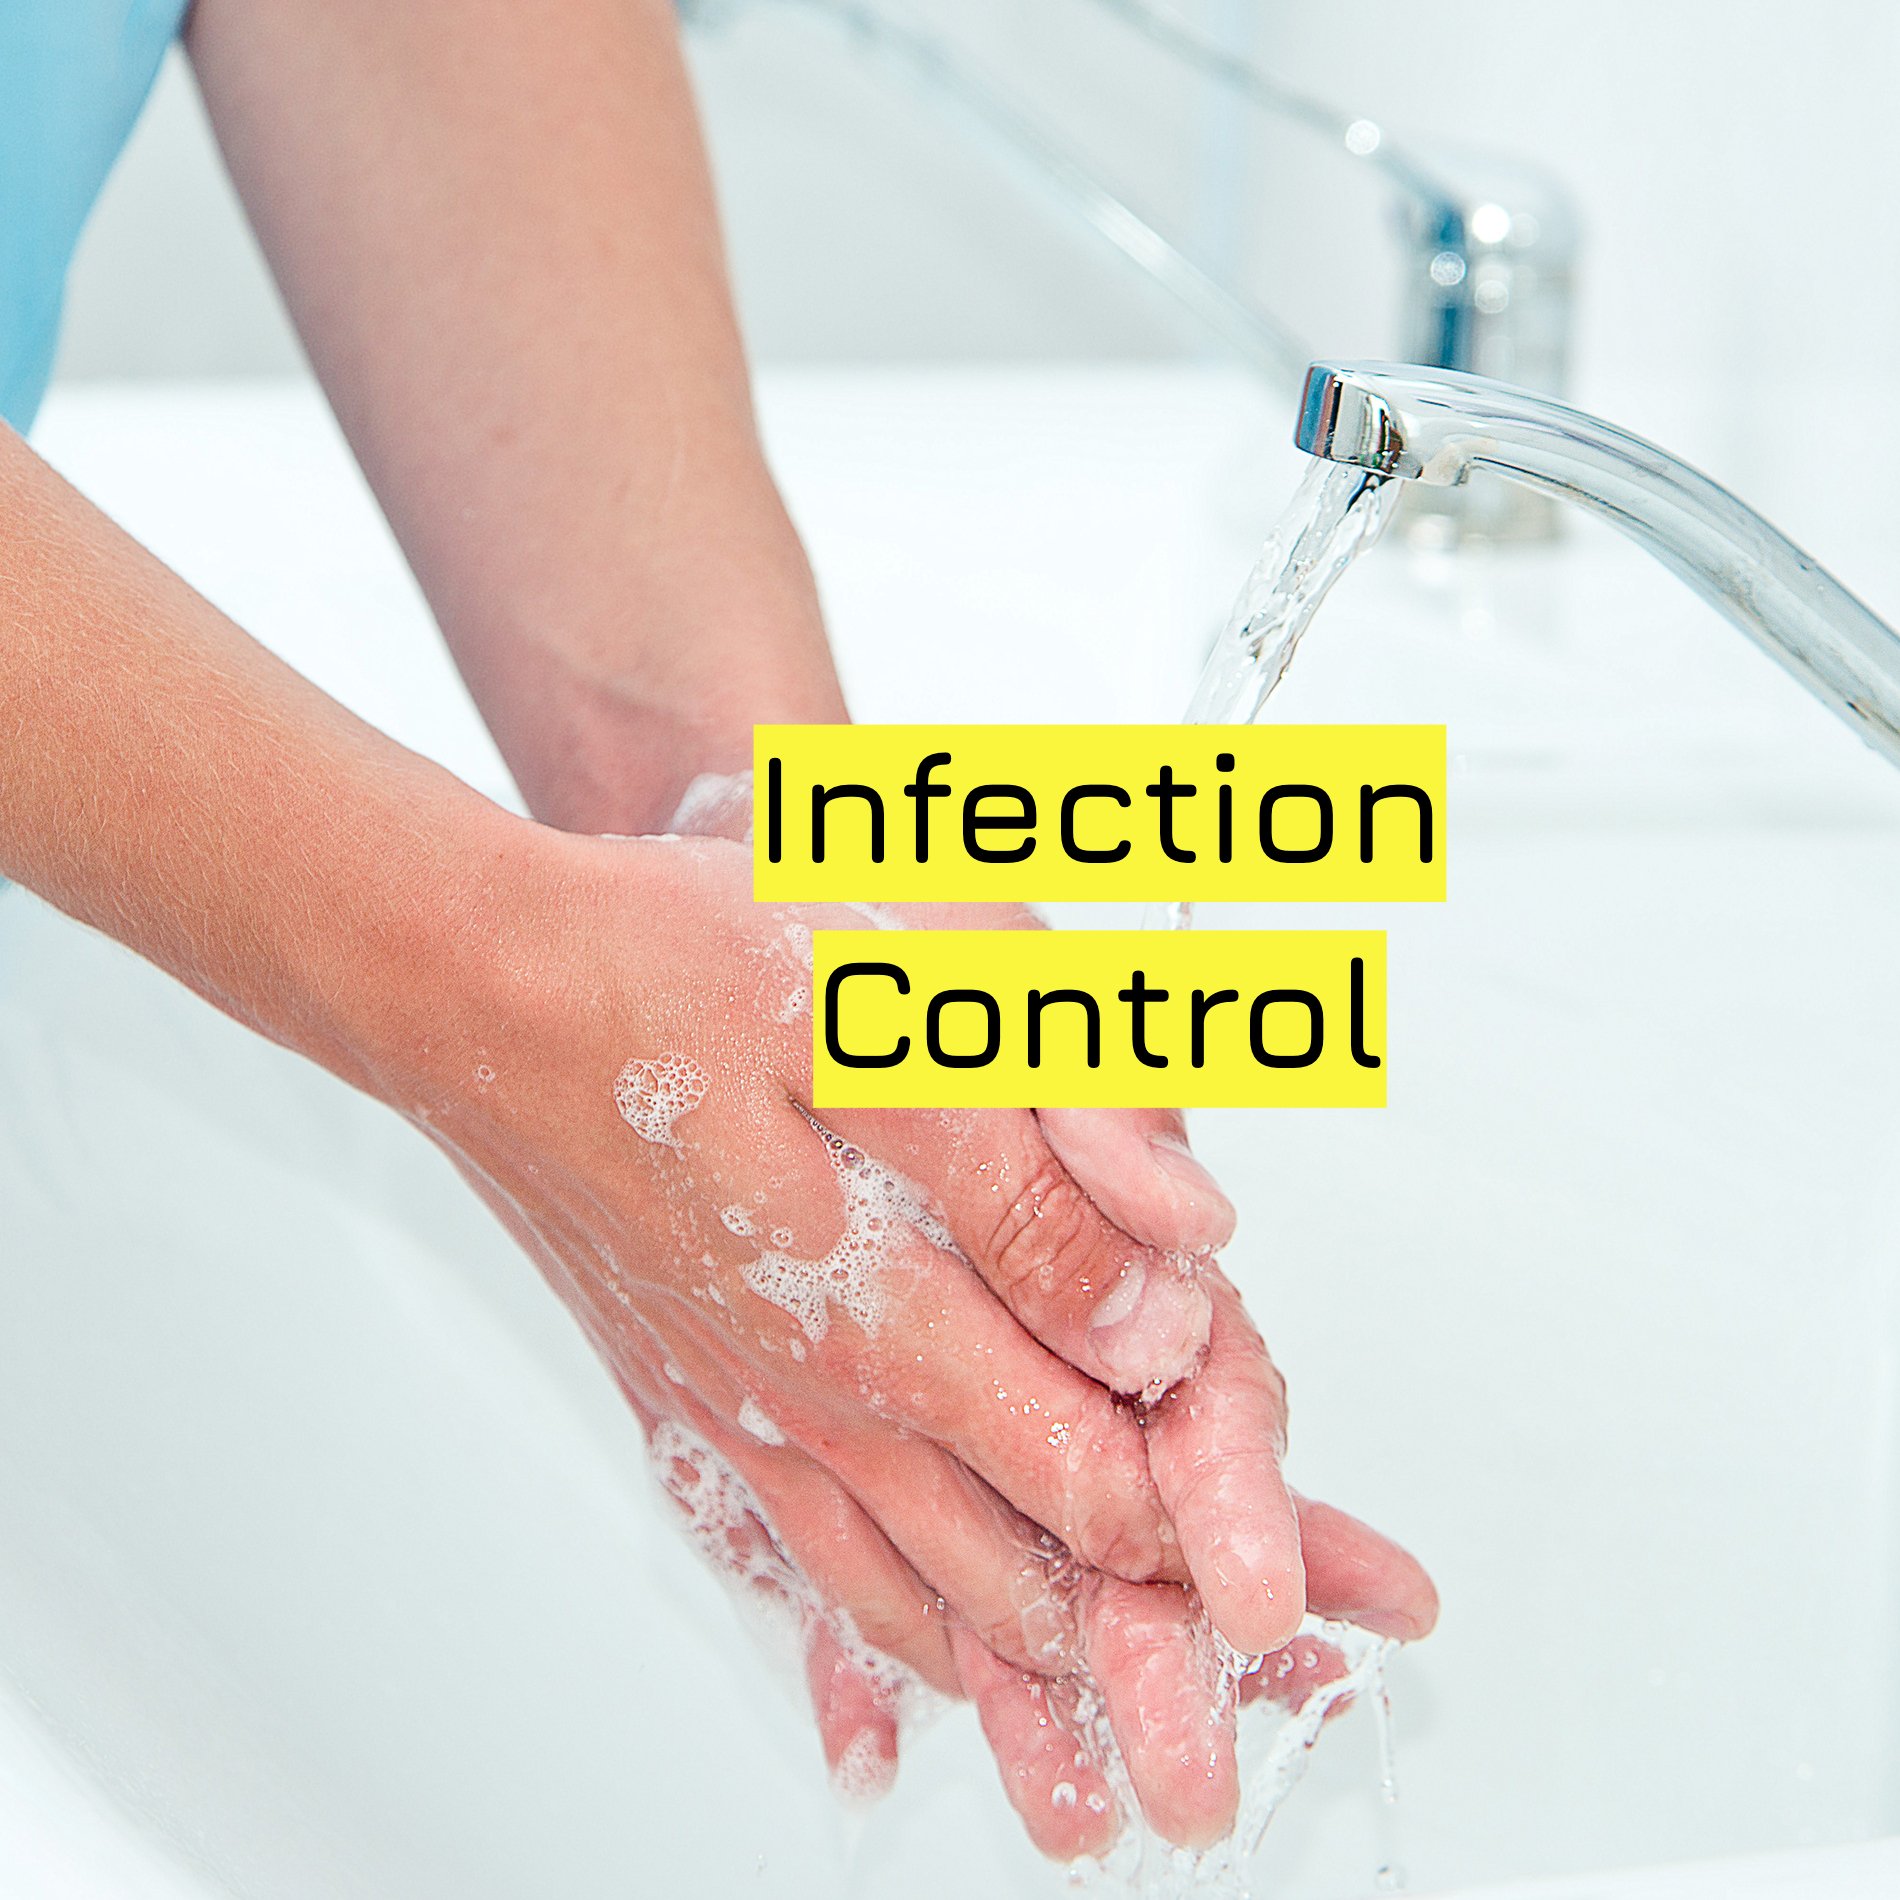 Infection Control .jpg